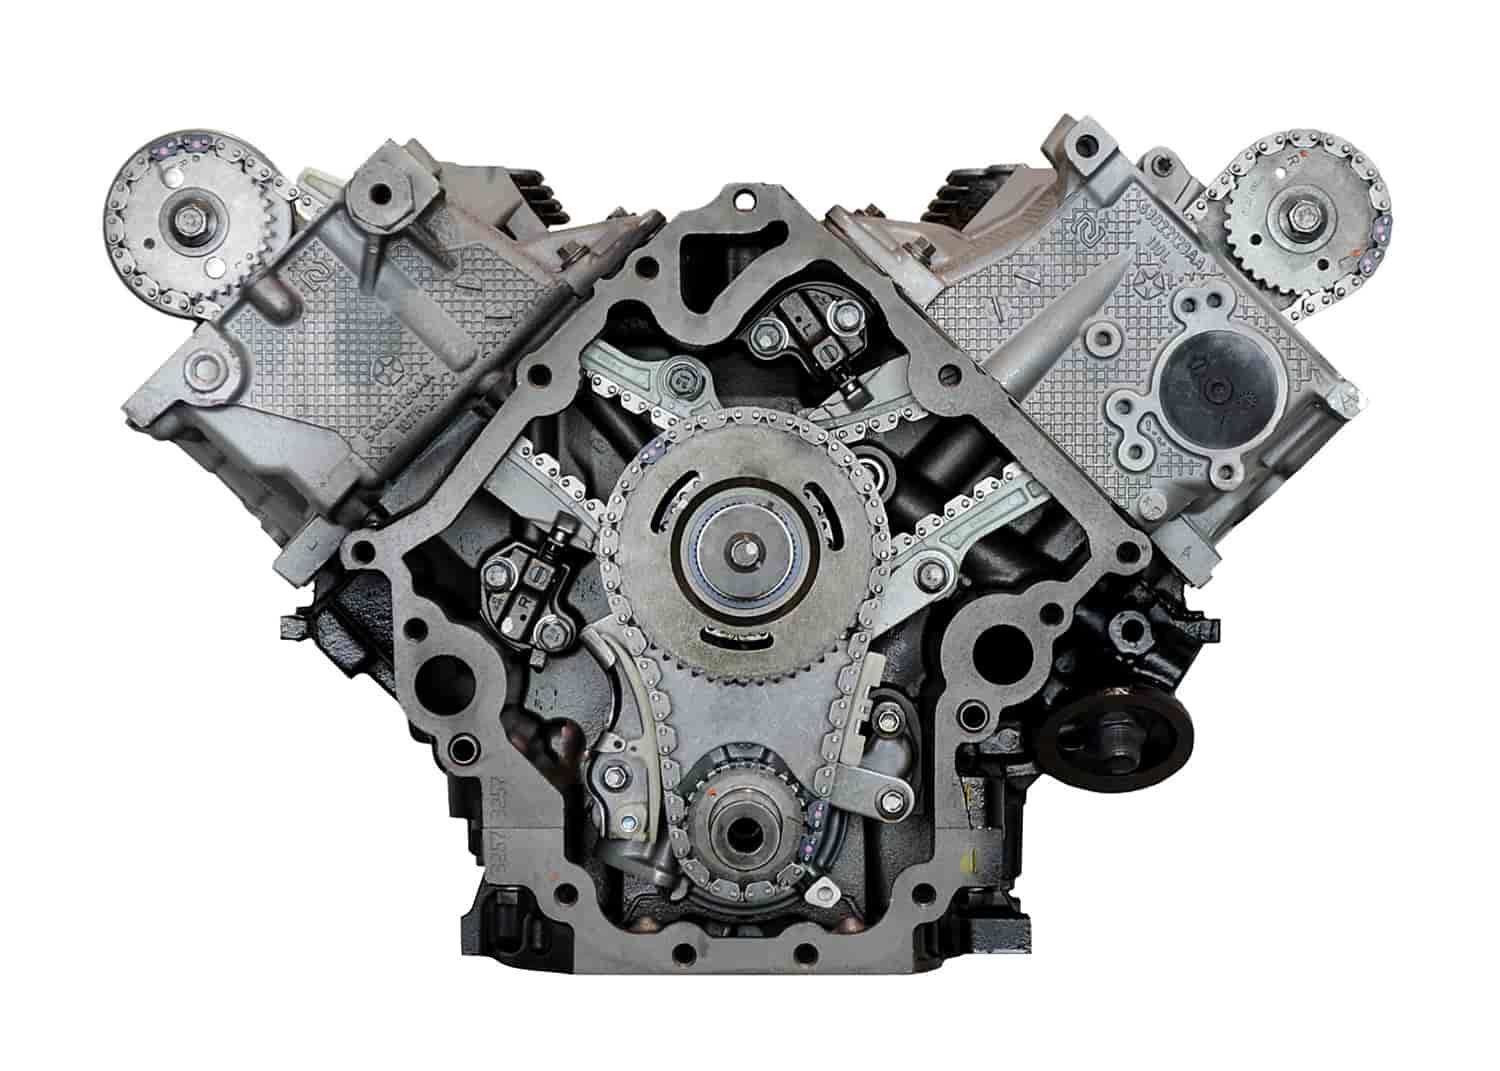 Remanufactured Crate Engine for 2008-2013 Chrysler/Dodge/Jeep/Ram